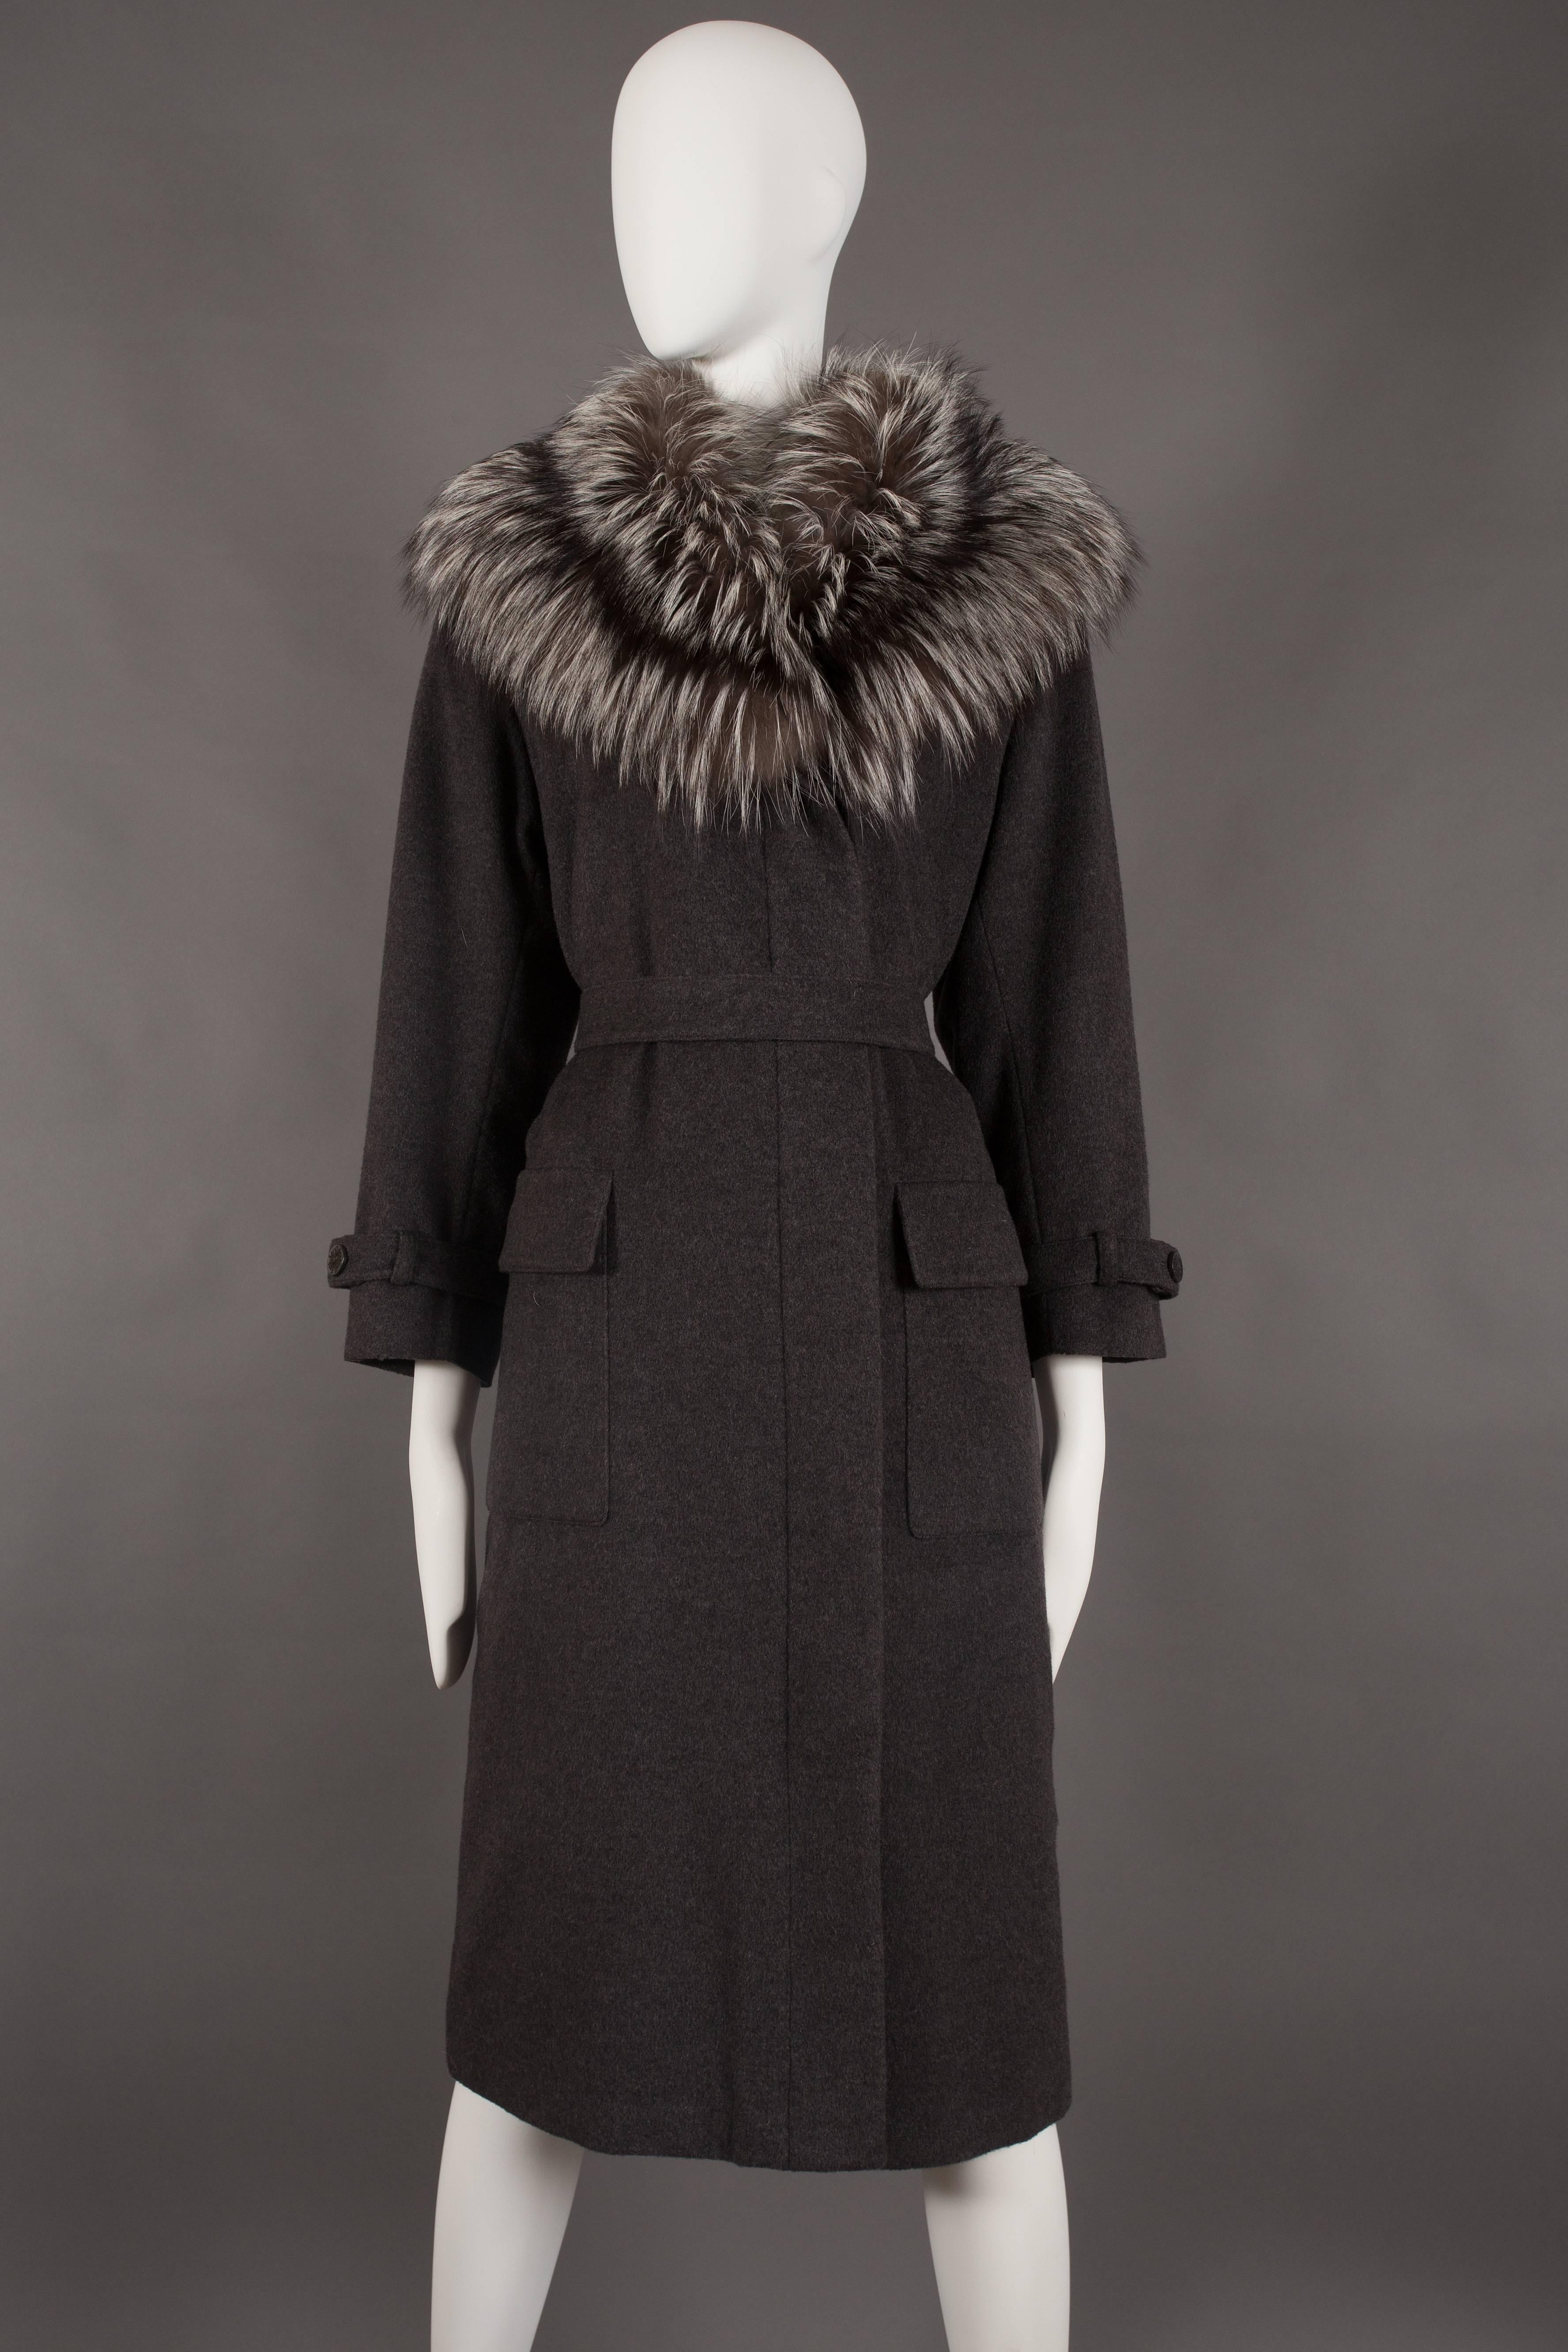 A Yves Saint Laurent charcoal grey cashmere fall coat, circa 1990. 

Exaggerated arctic fox fur collar, hidden button closures on front opening, matching double button belt, two front flap pockets and black satin quilted lining. 